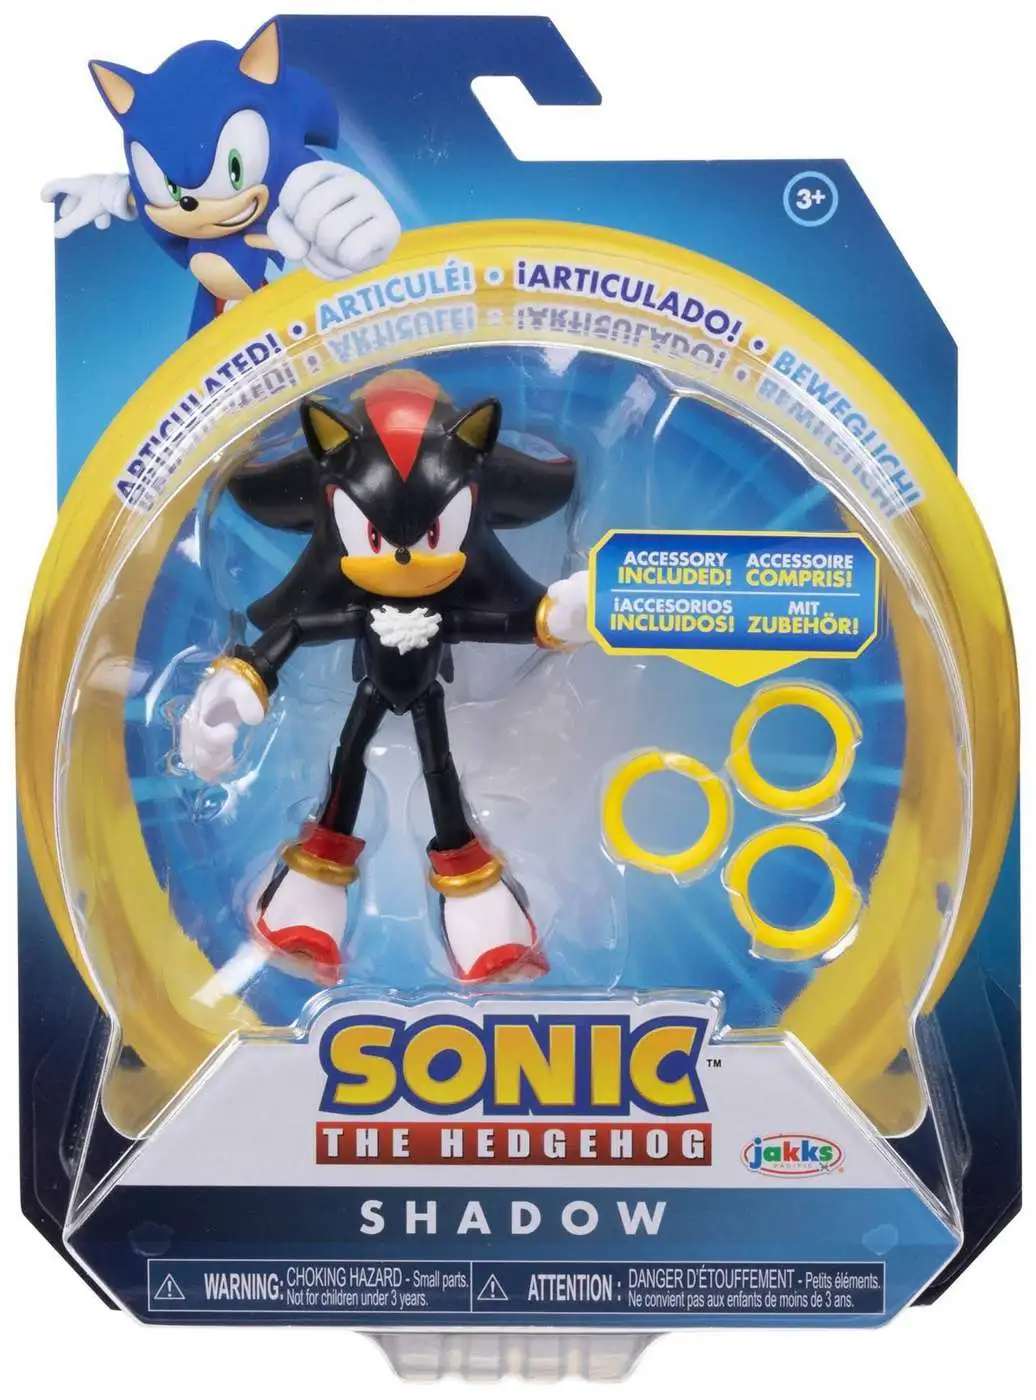 Sonic The Hedgehog Green Hill Zone Playset with 2.5 Sonic Action Figure